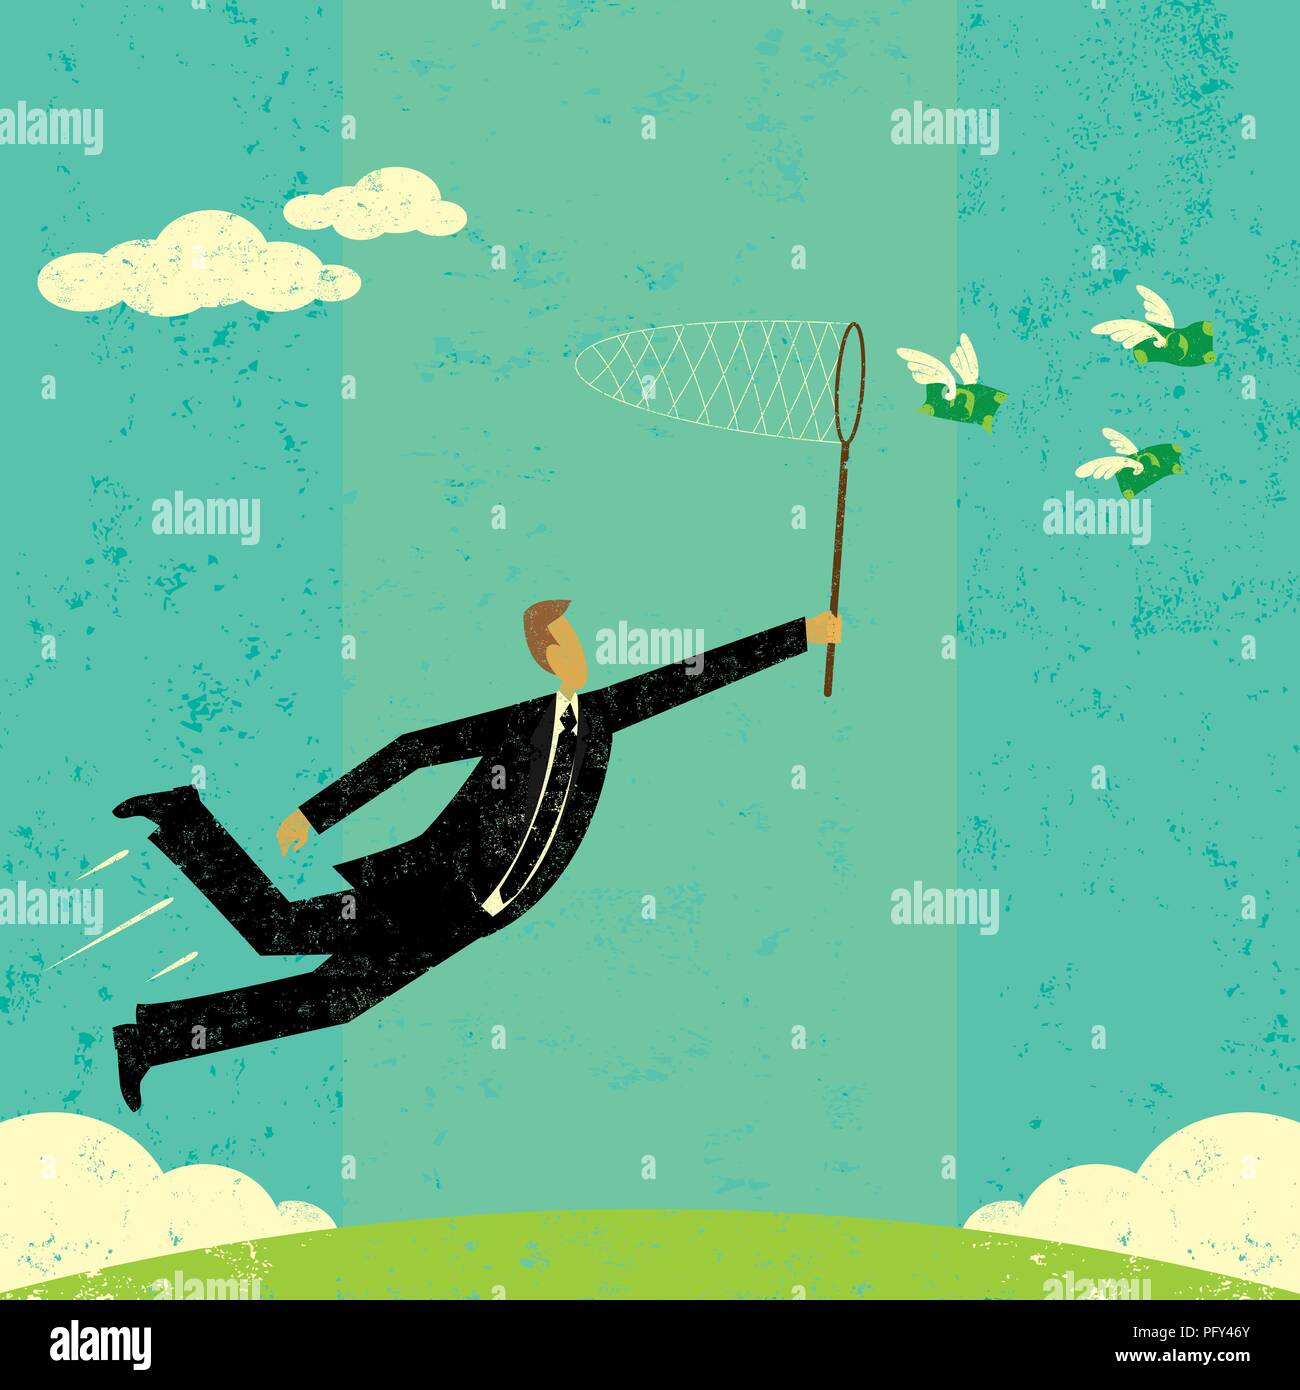 Chasing Dollars. A businessman chasing flying money with a butterfly net. Stock Vector